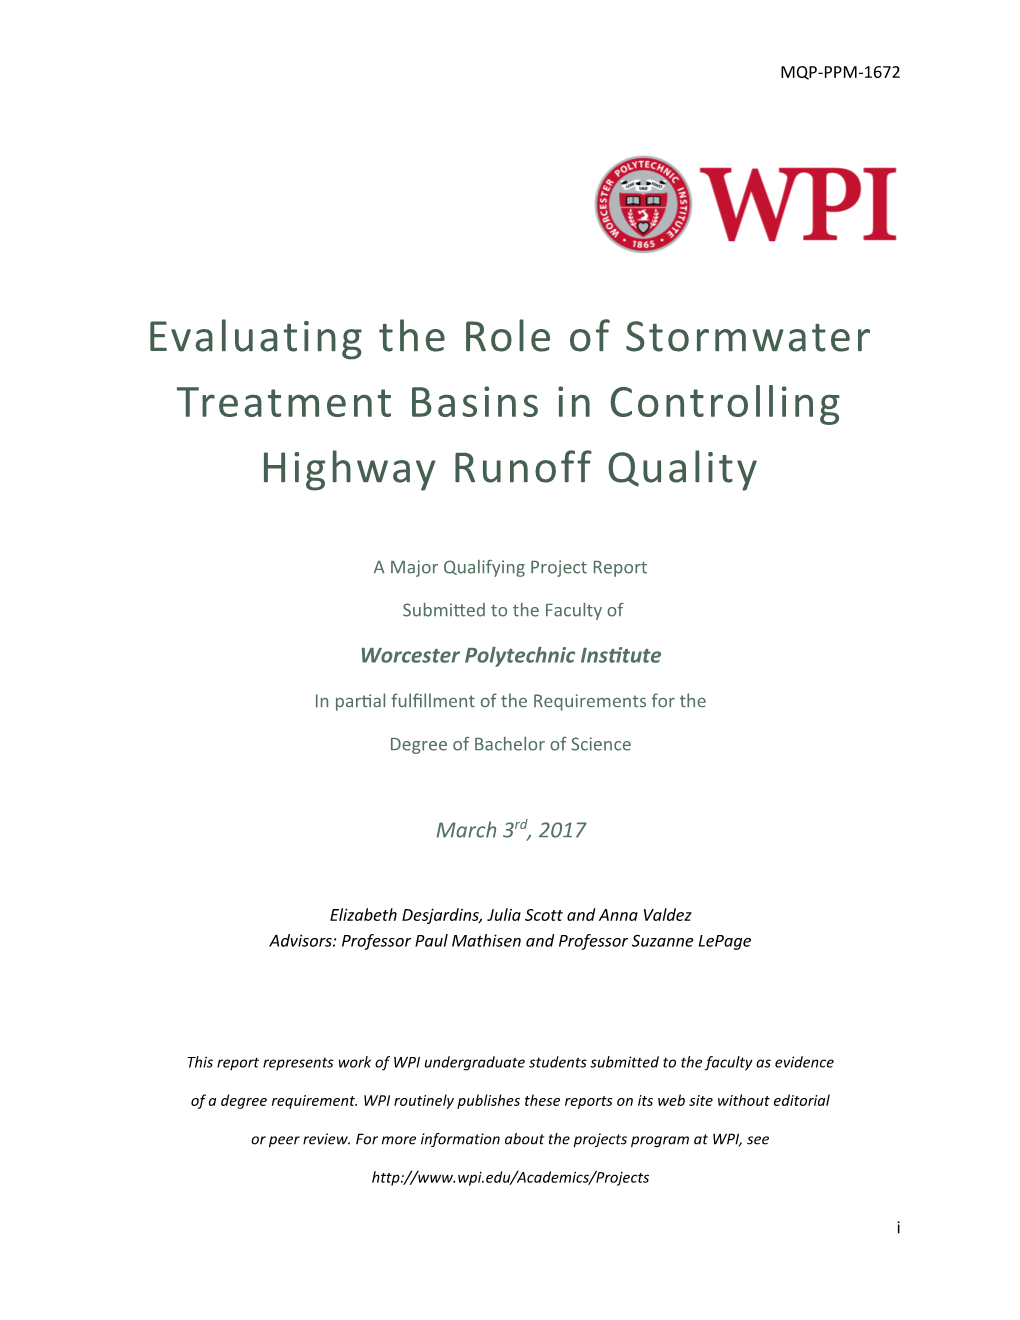 Evaluating the Role of Stormwater Treatment Basins in Controlling Highway Runoff Quality